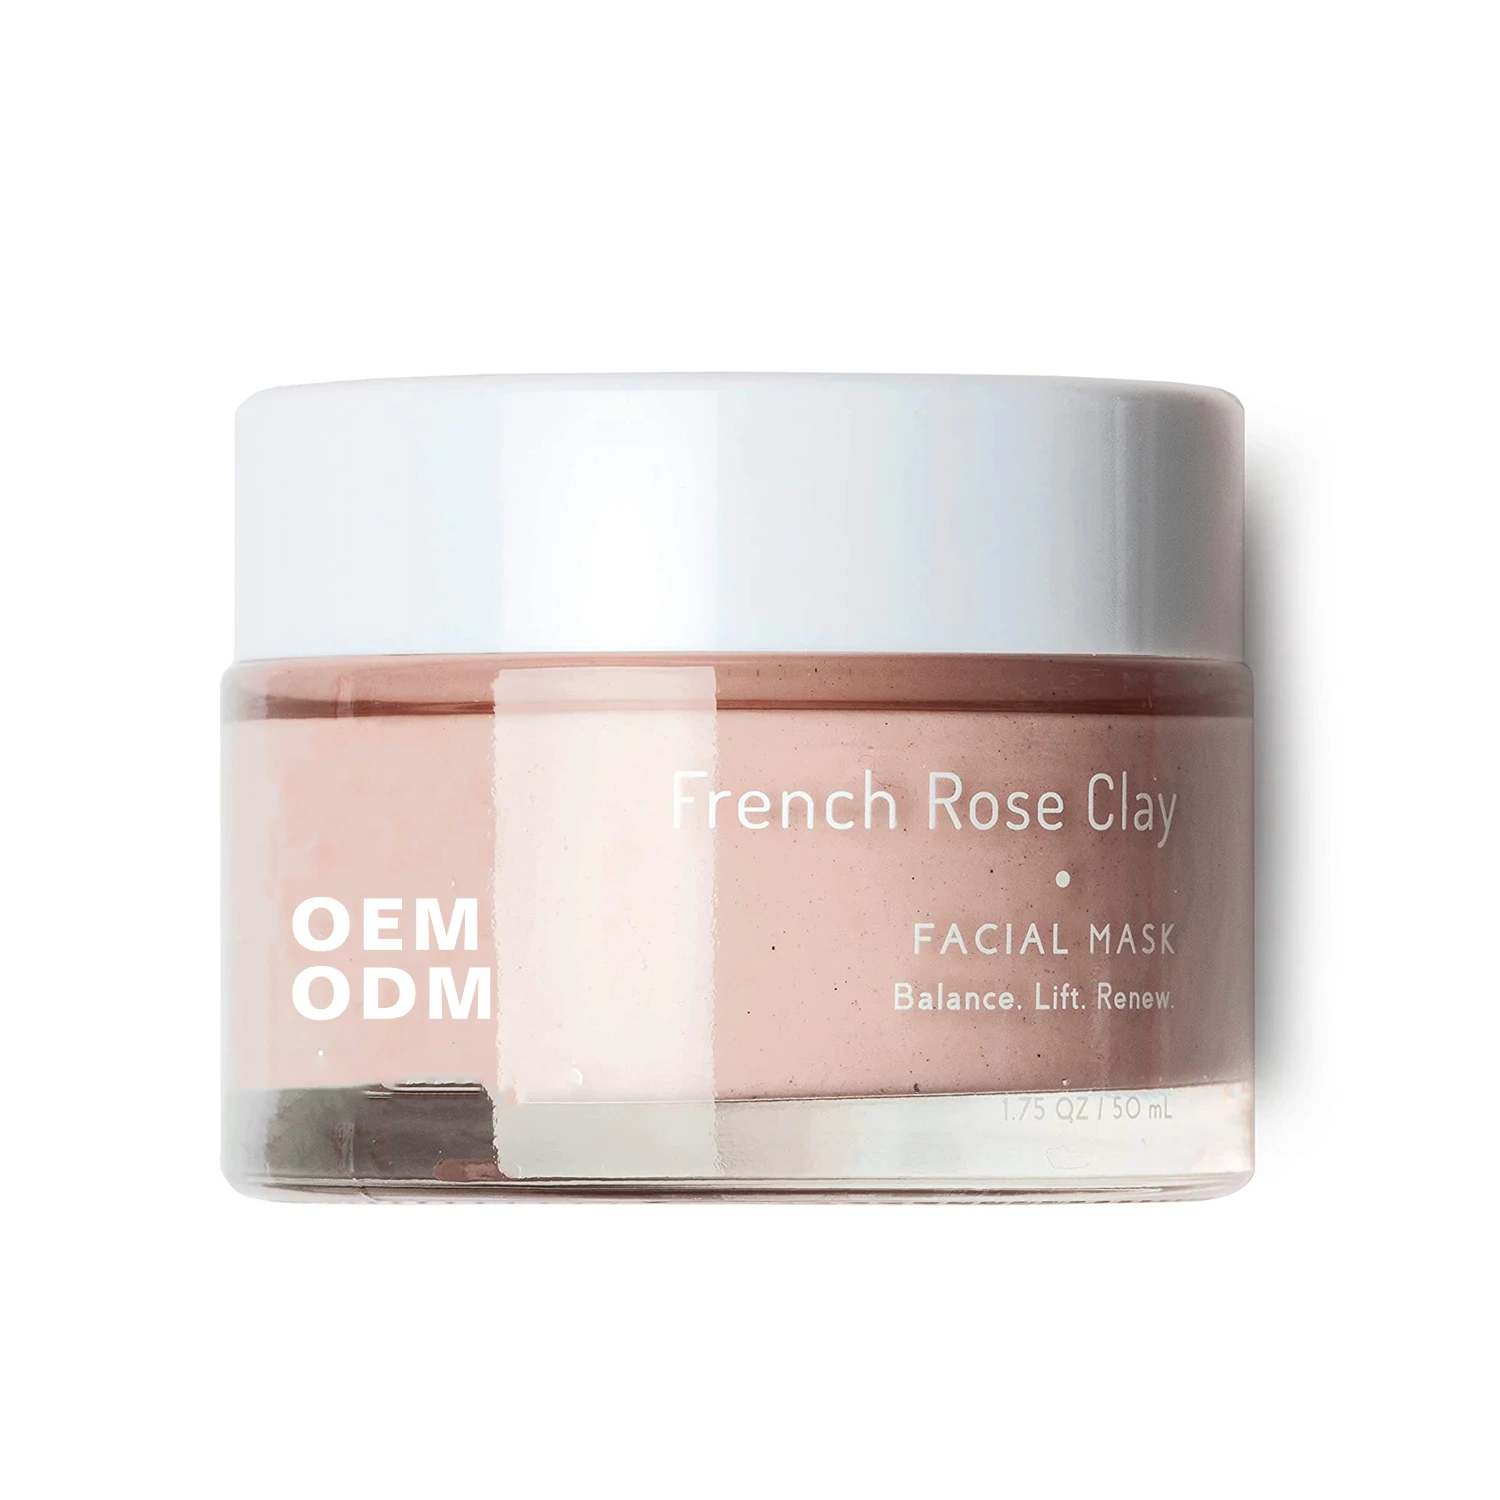 

AiXin OEM ODM Private Label Rose Clay Mask Pore Minimizer Anti Aging in French Rose Clay Facial Mask